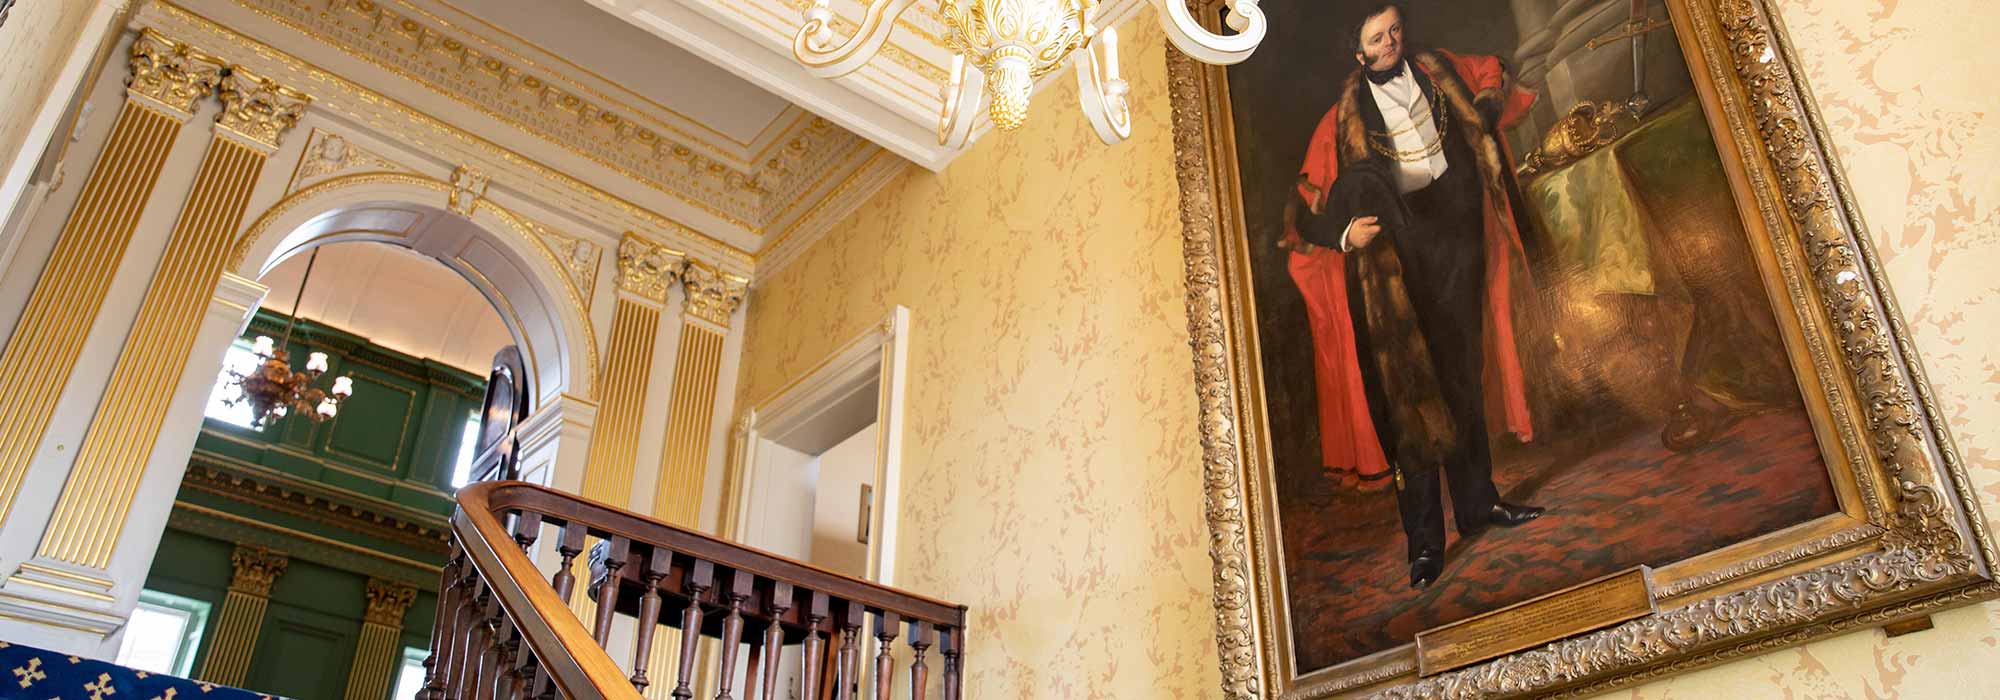 A view of a staircase inside the Mansion House in which a large portrait is hung alongside one wall